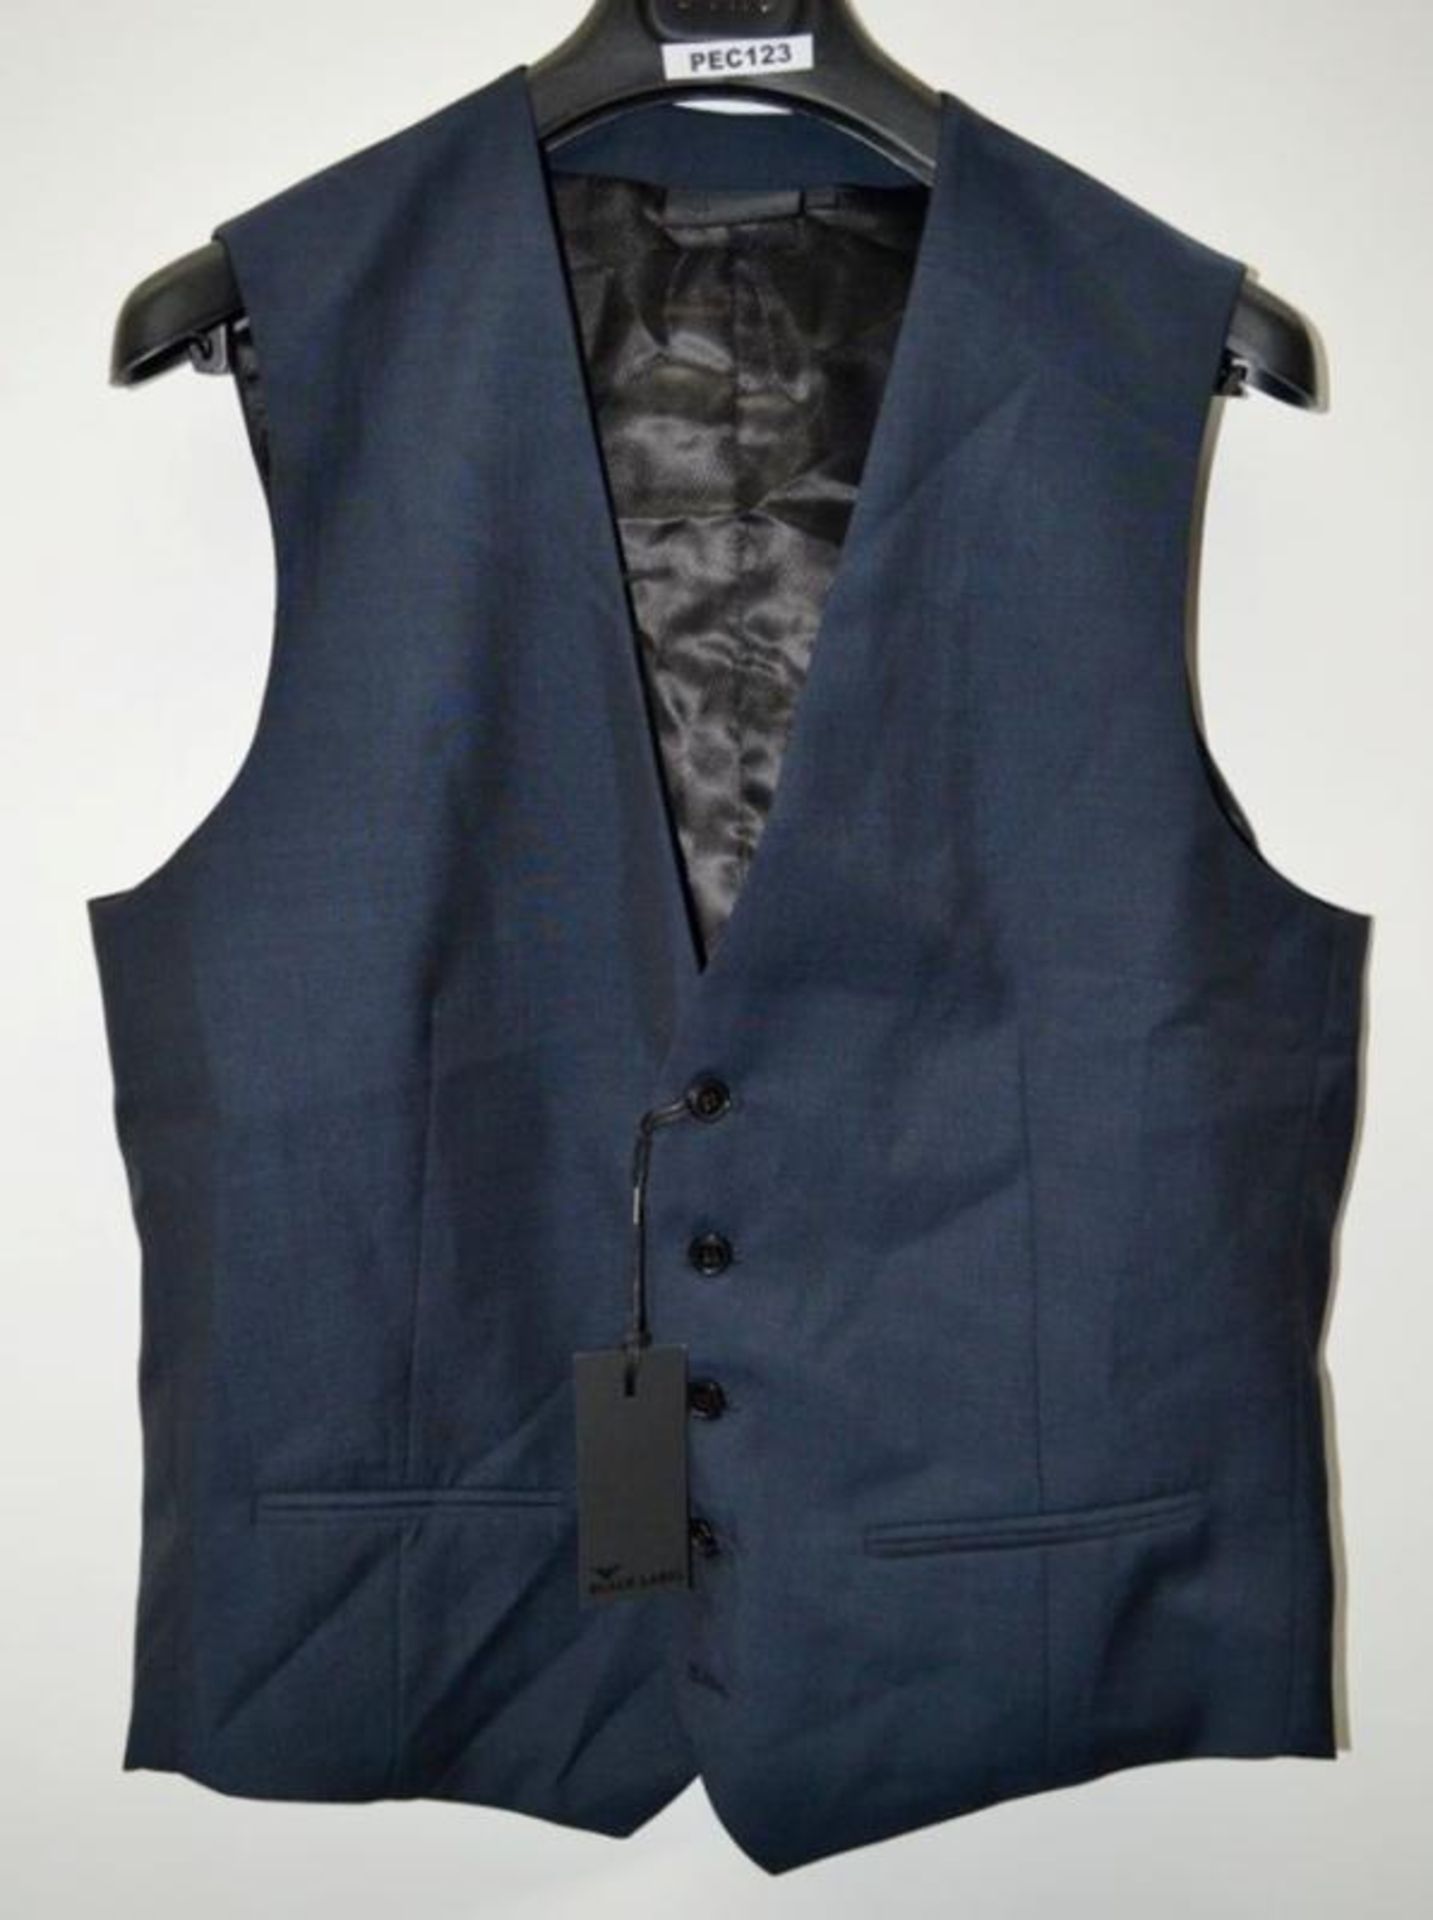 1 x PRE END Branded "LOKE" Mens Blazer Jacket With Waistcoat - New Stock With Tags - Recent Store - Image 5 of 5